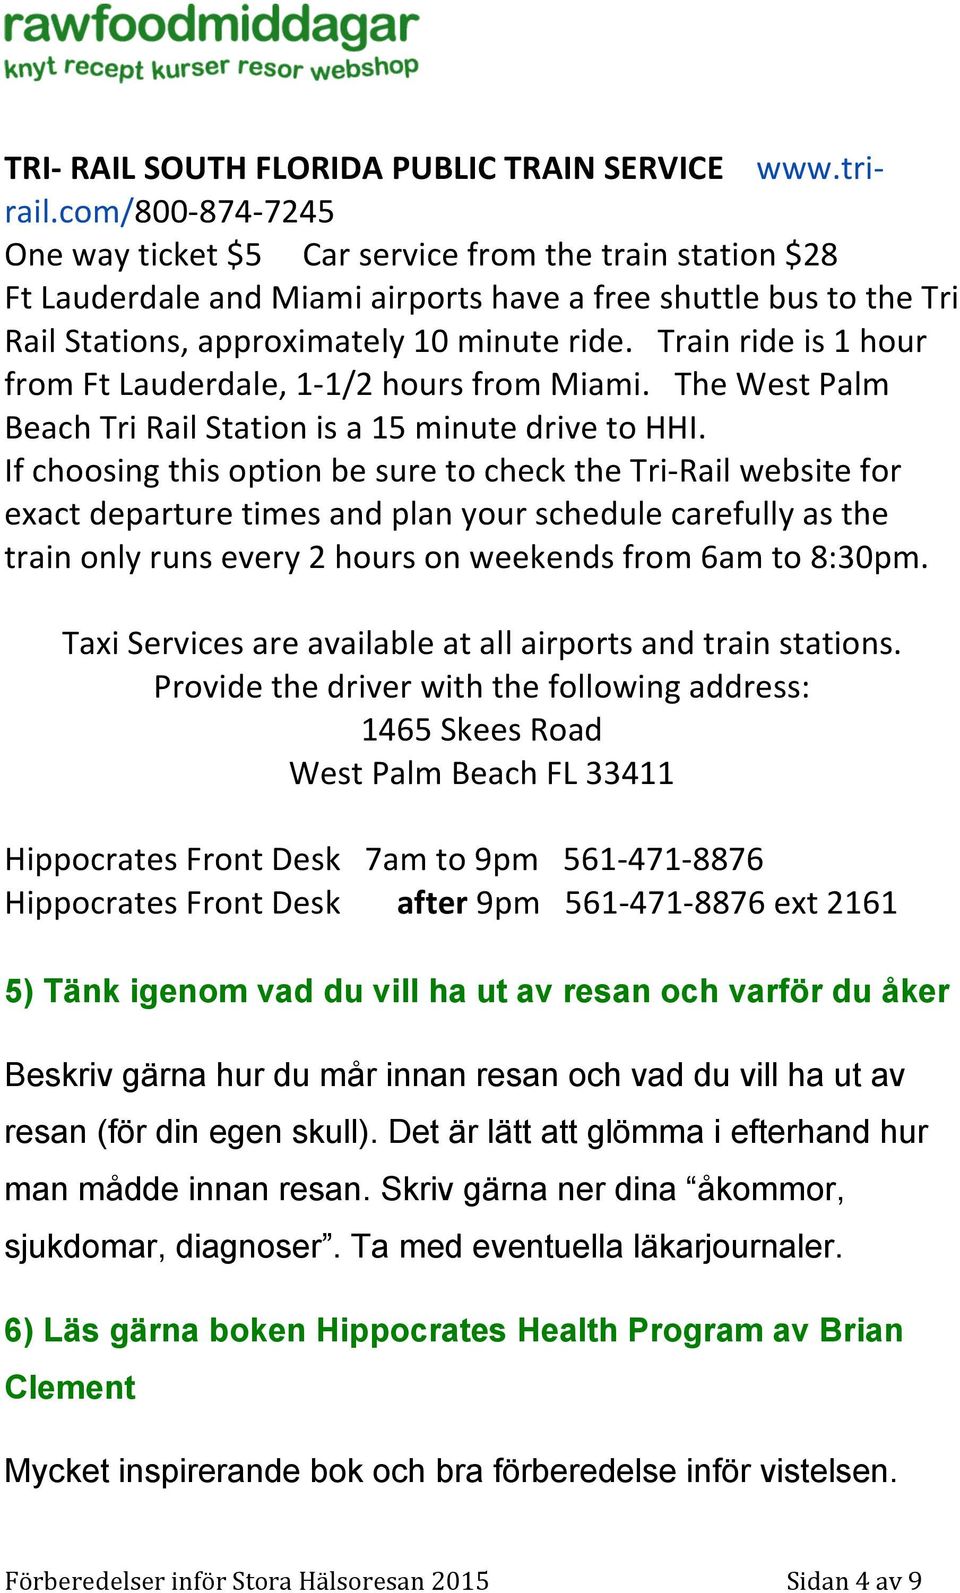 Train ride is 1 hour from Ft Lauderdale, 1-1/2 hours from Miami. The West Palm Beach Tri Rail Station is a 15 minute drive to HHI.